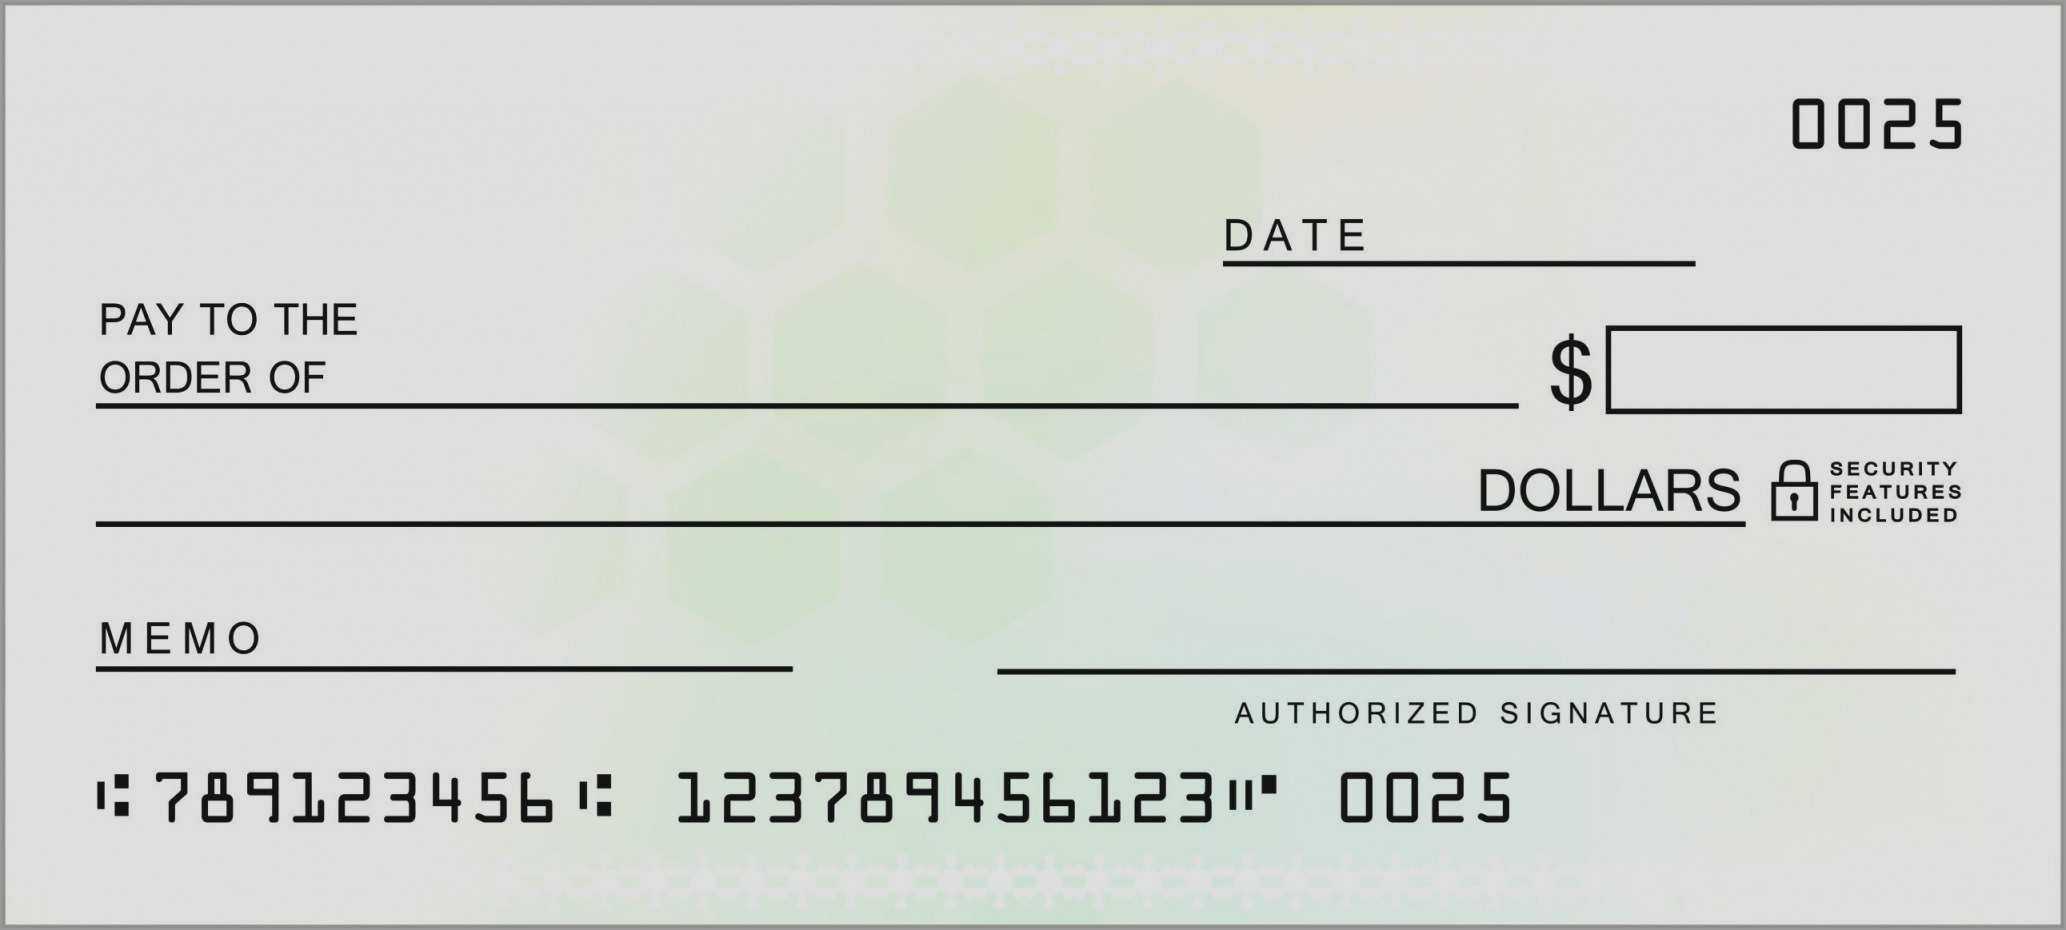 019 Template Ideas Free Blank Check Editable Cheque Fabulous With Blank Cheque Template Uk